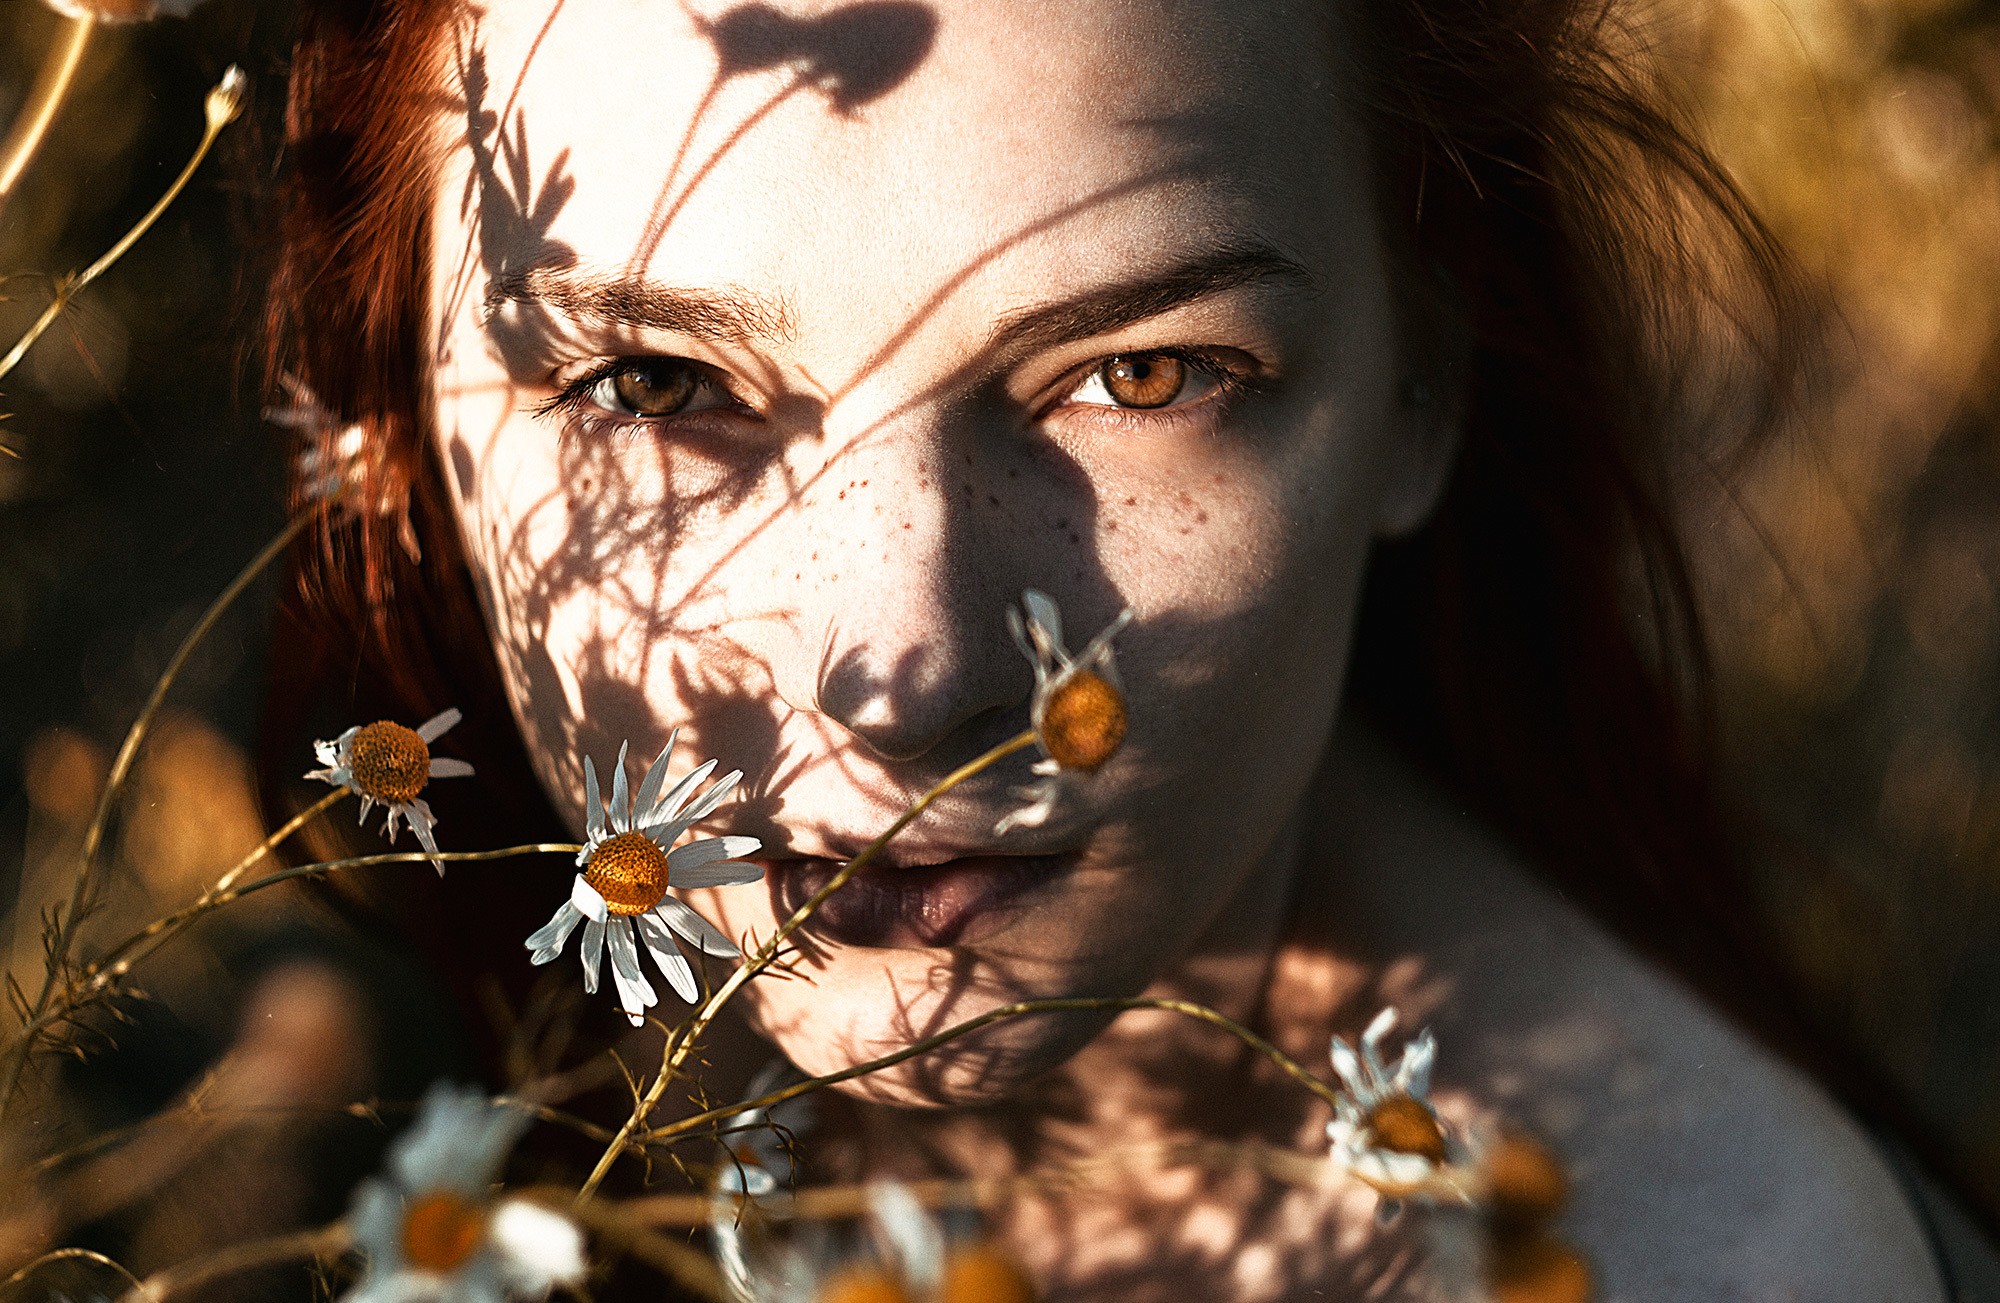 People 2000x1303 women model face sunlight women outdoors freckles daisies brown eyes pale closeup looking at viewer plants